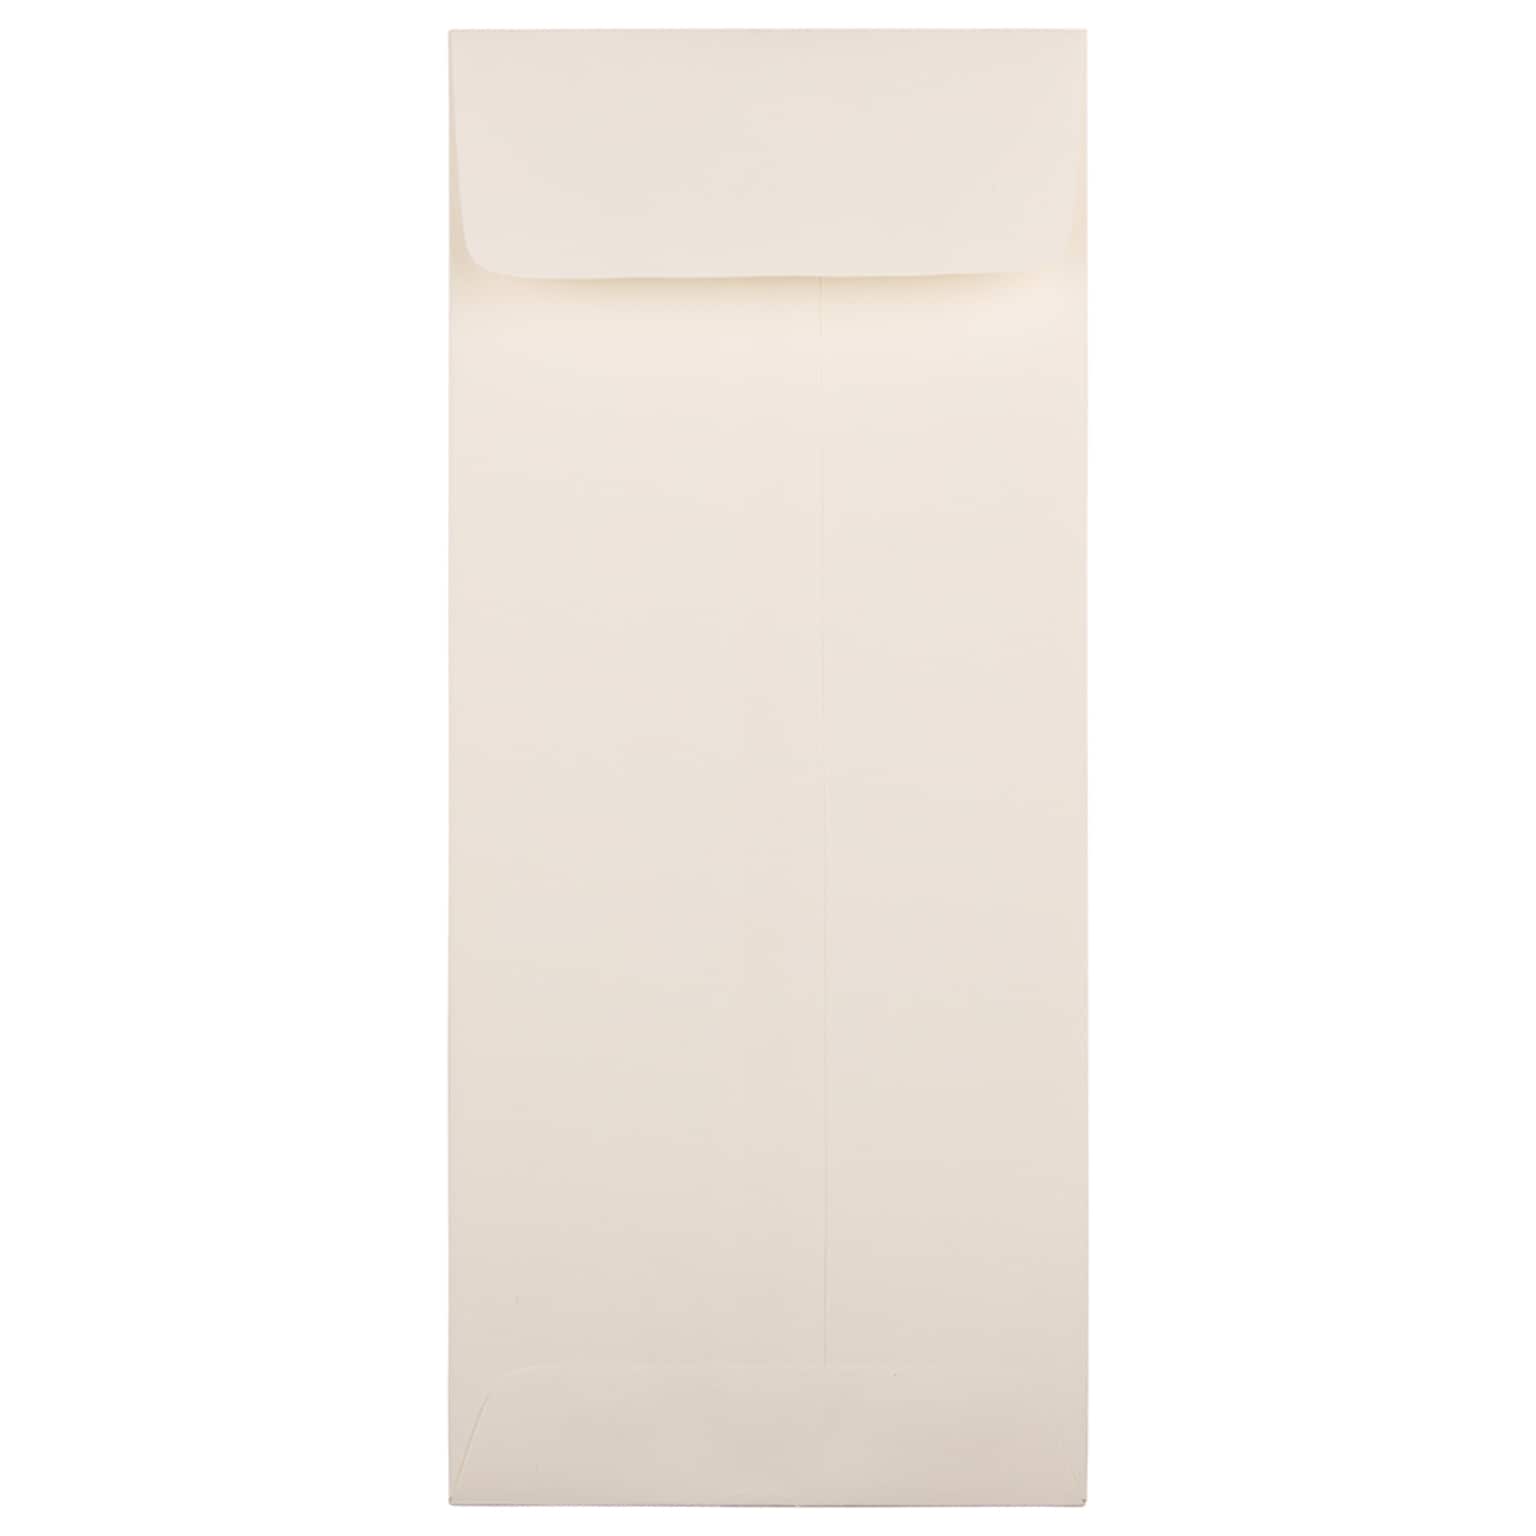 JAM Paper Strathmore Open End #11 Currency Envelope, 4 1/2 x 10 3/8, Natural White, 500/Pack (900905923H)